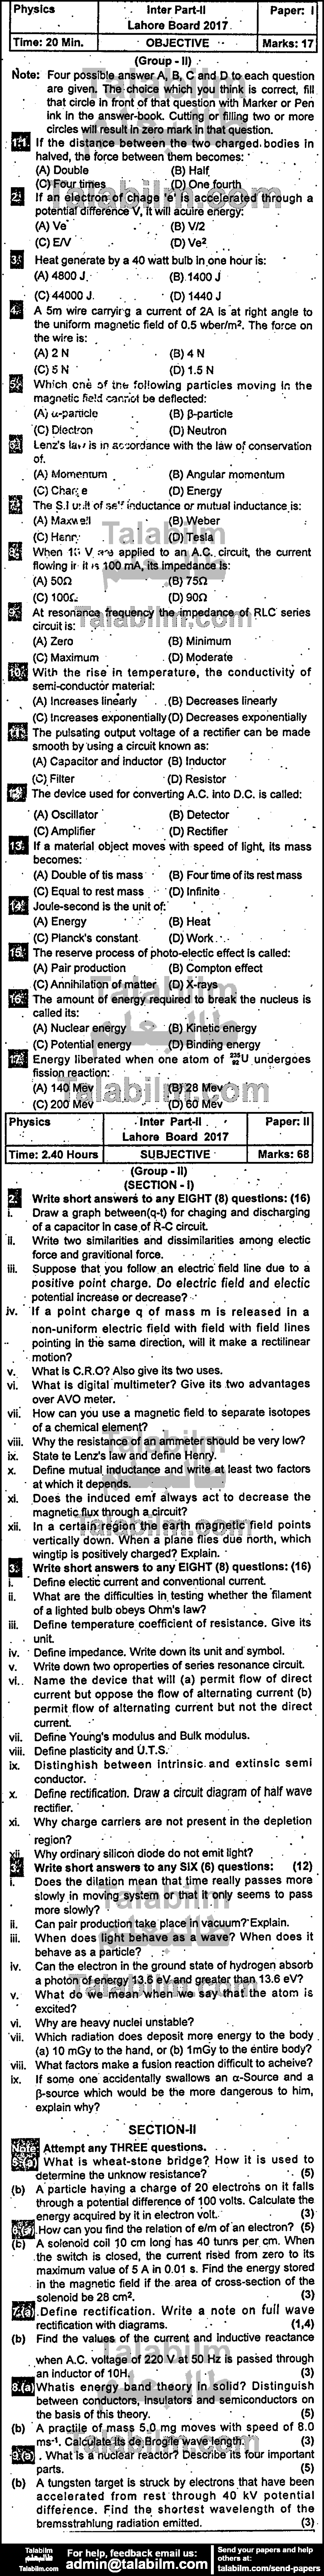 Physics 0 past paper for Group-II 2017